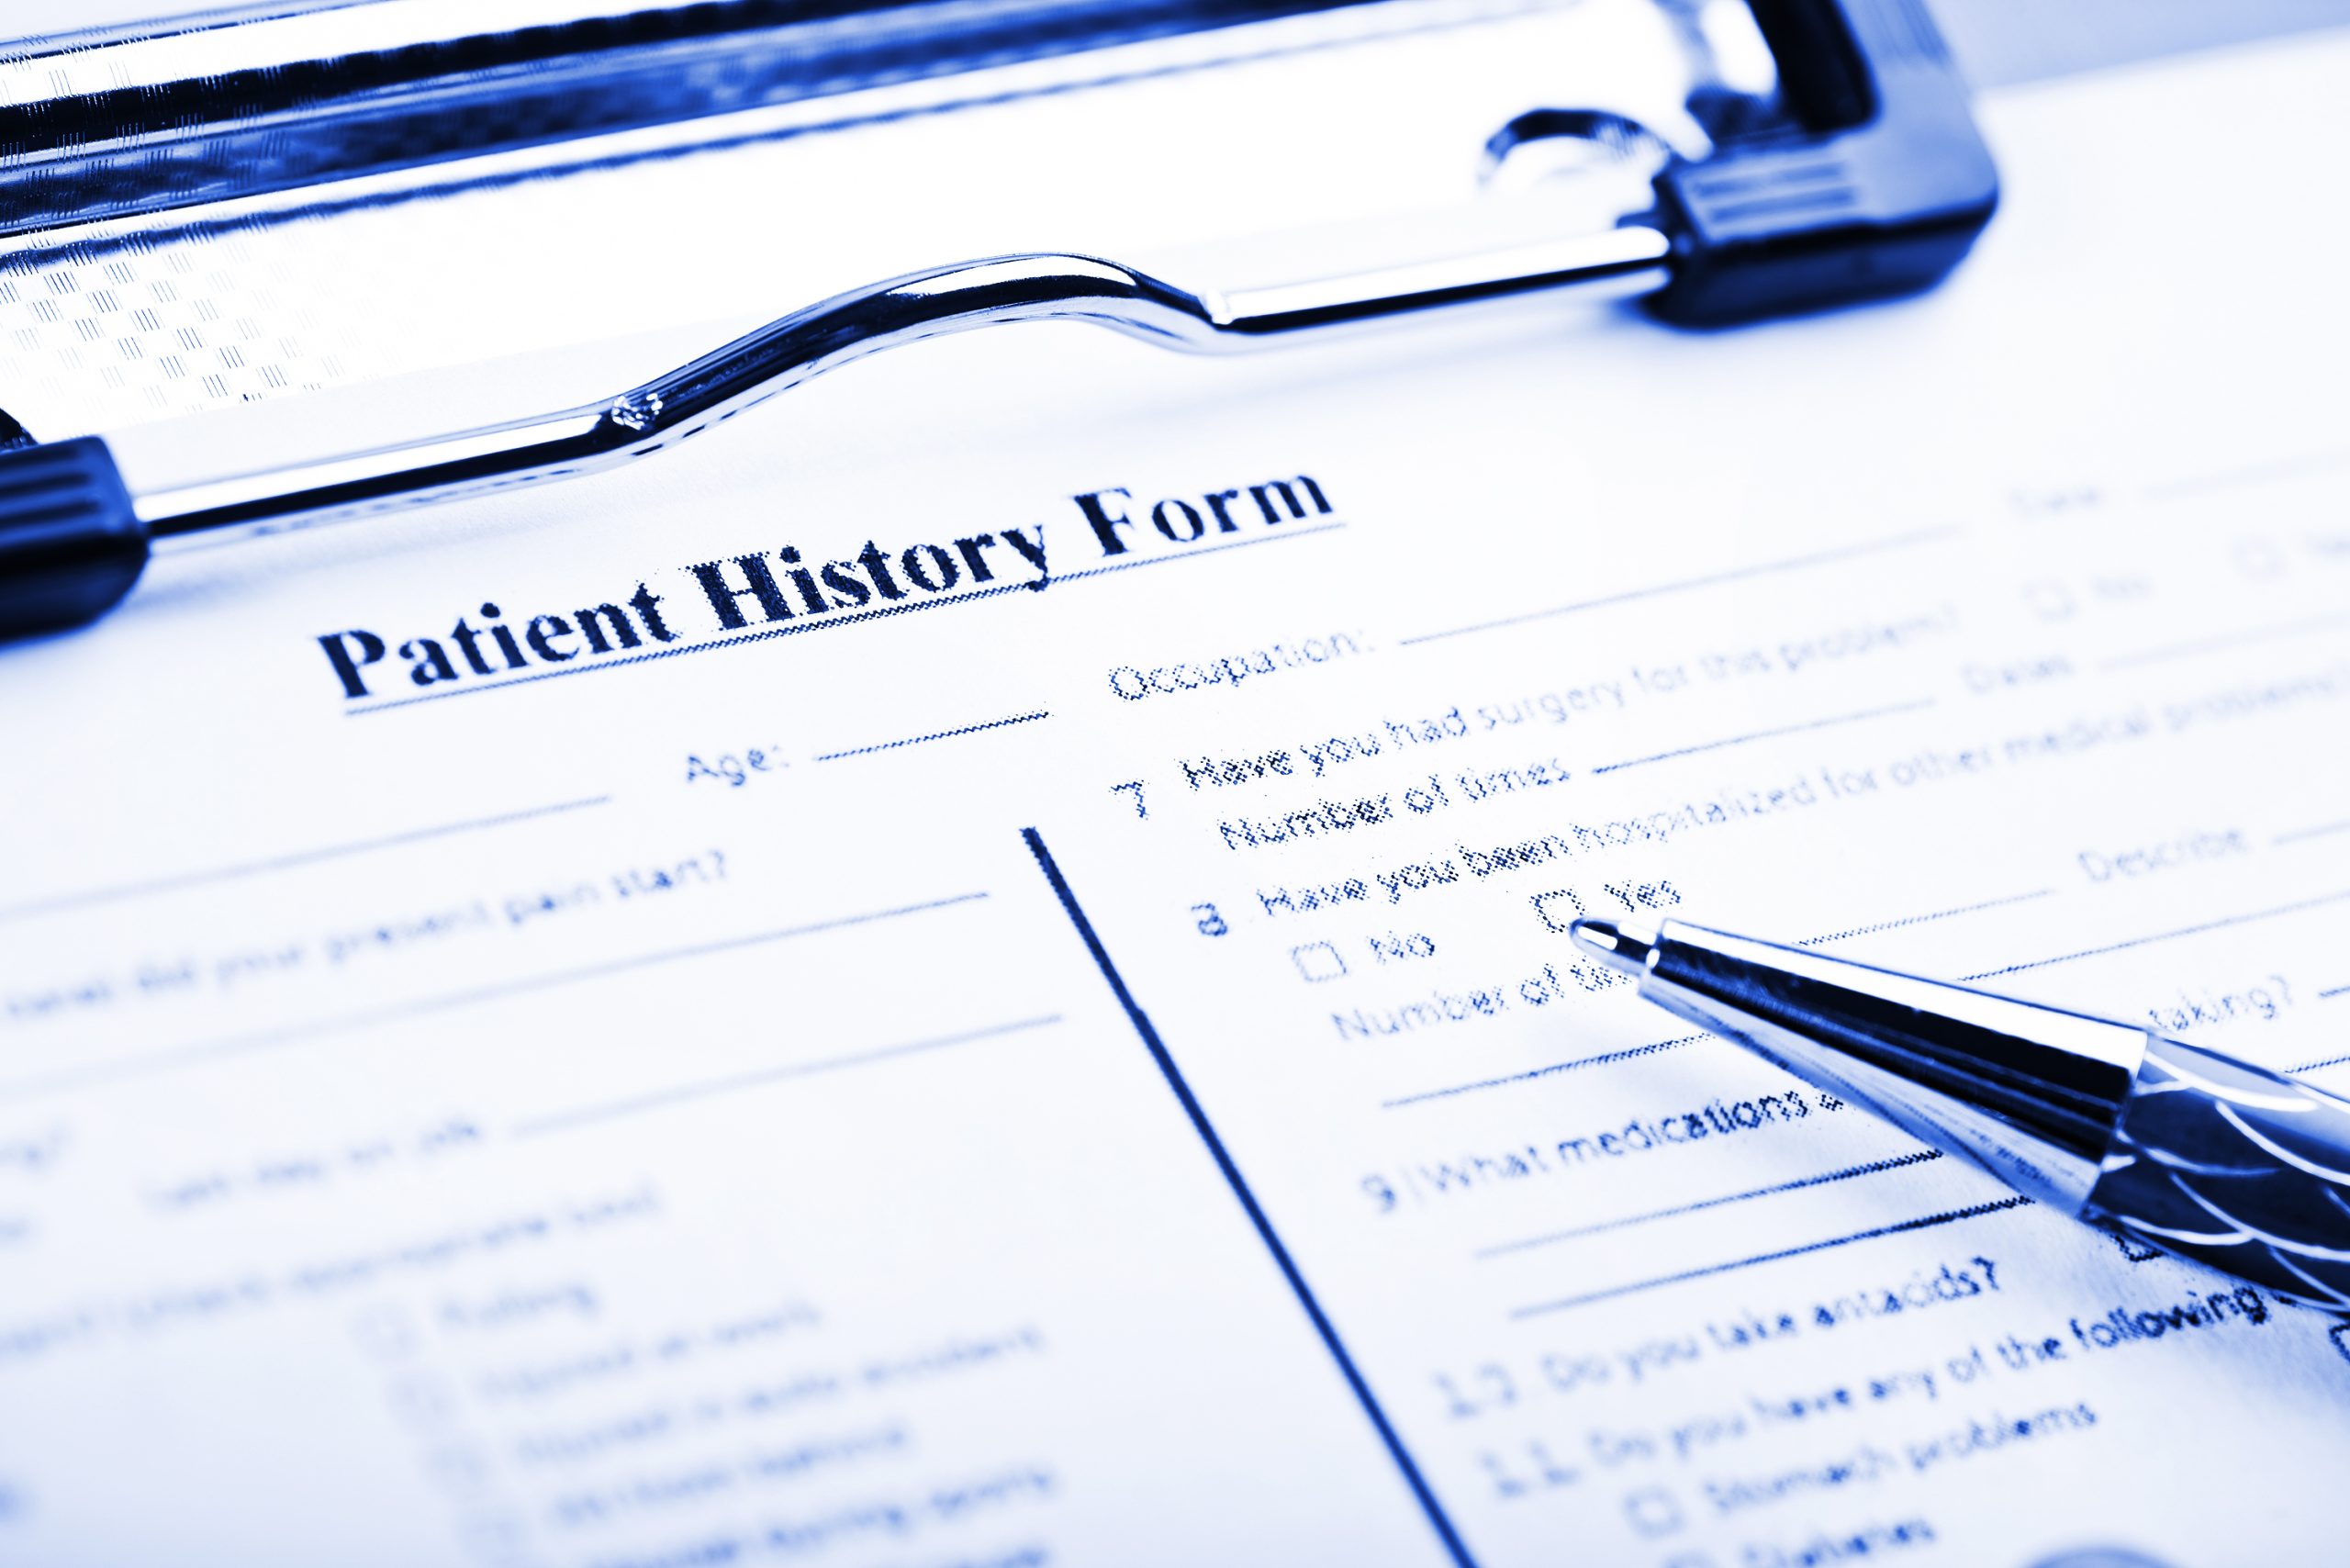 Close-up of a patient history form with a pen, representing the importance of collecting and organizing mental health histories for individuals with severe mental illness to improve care and outcomes